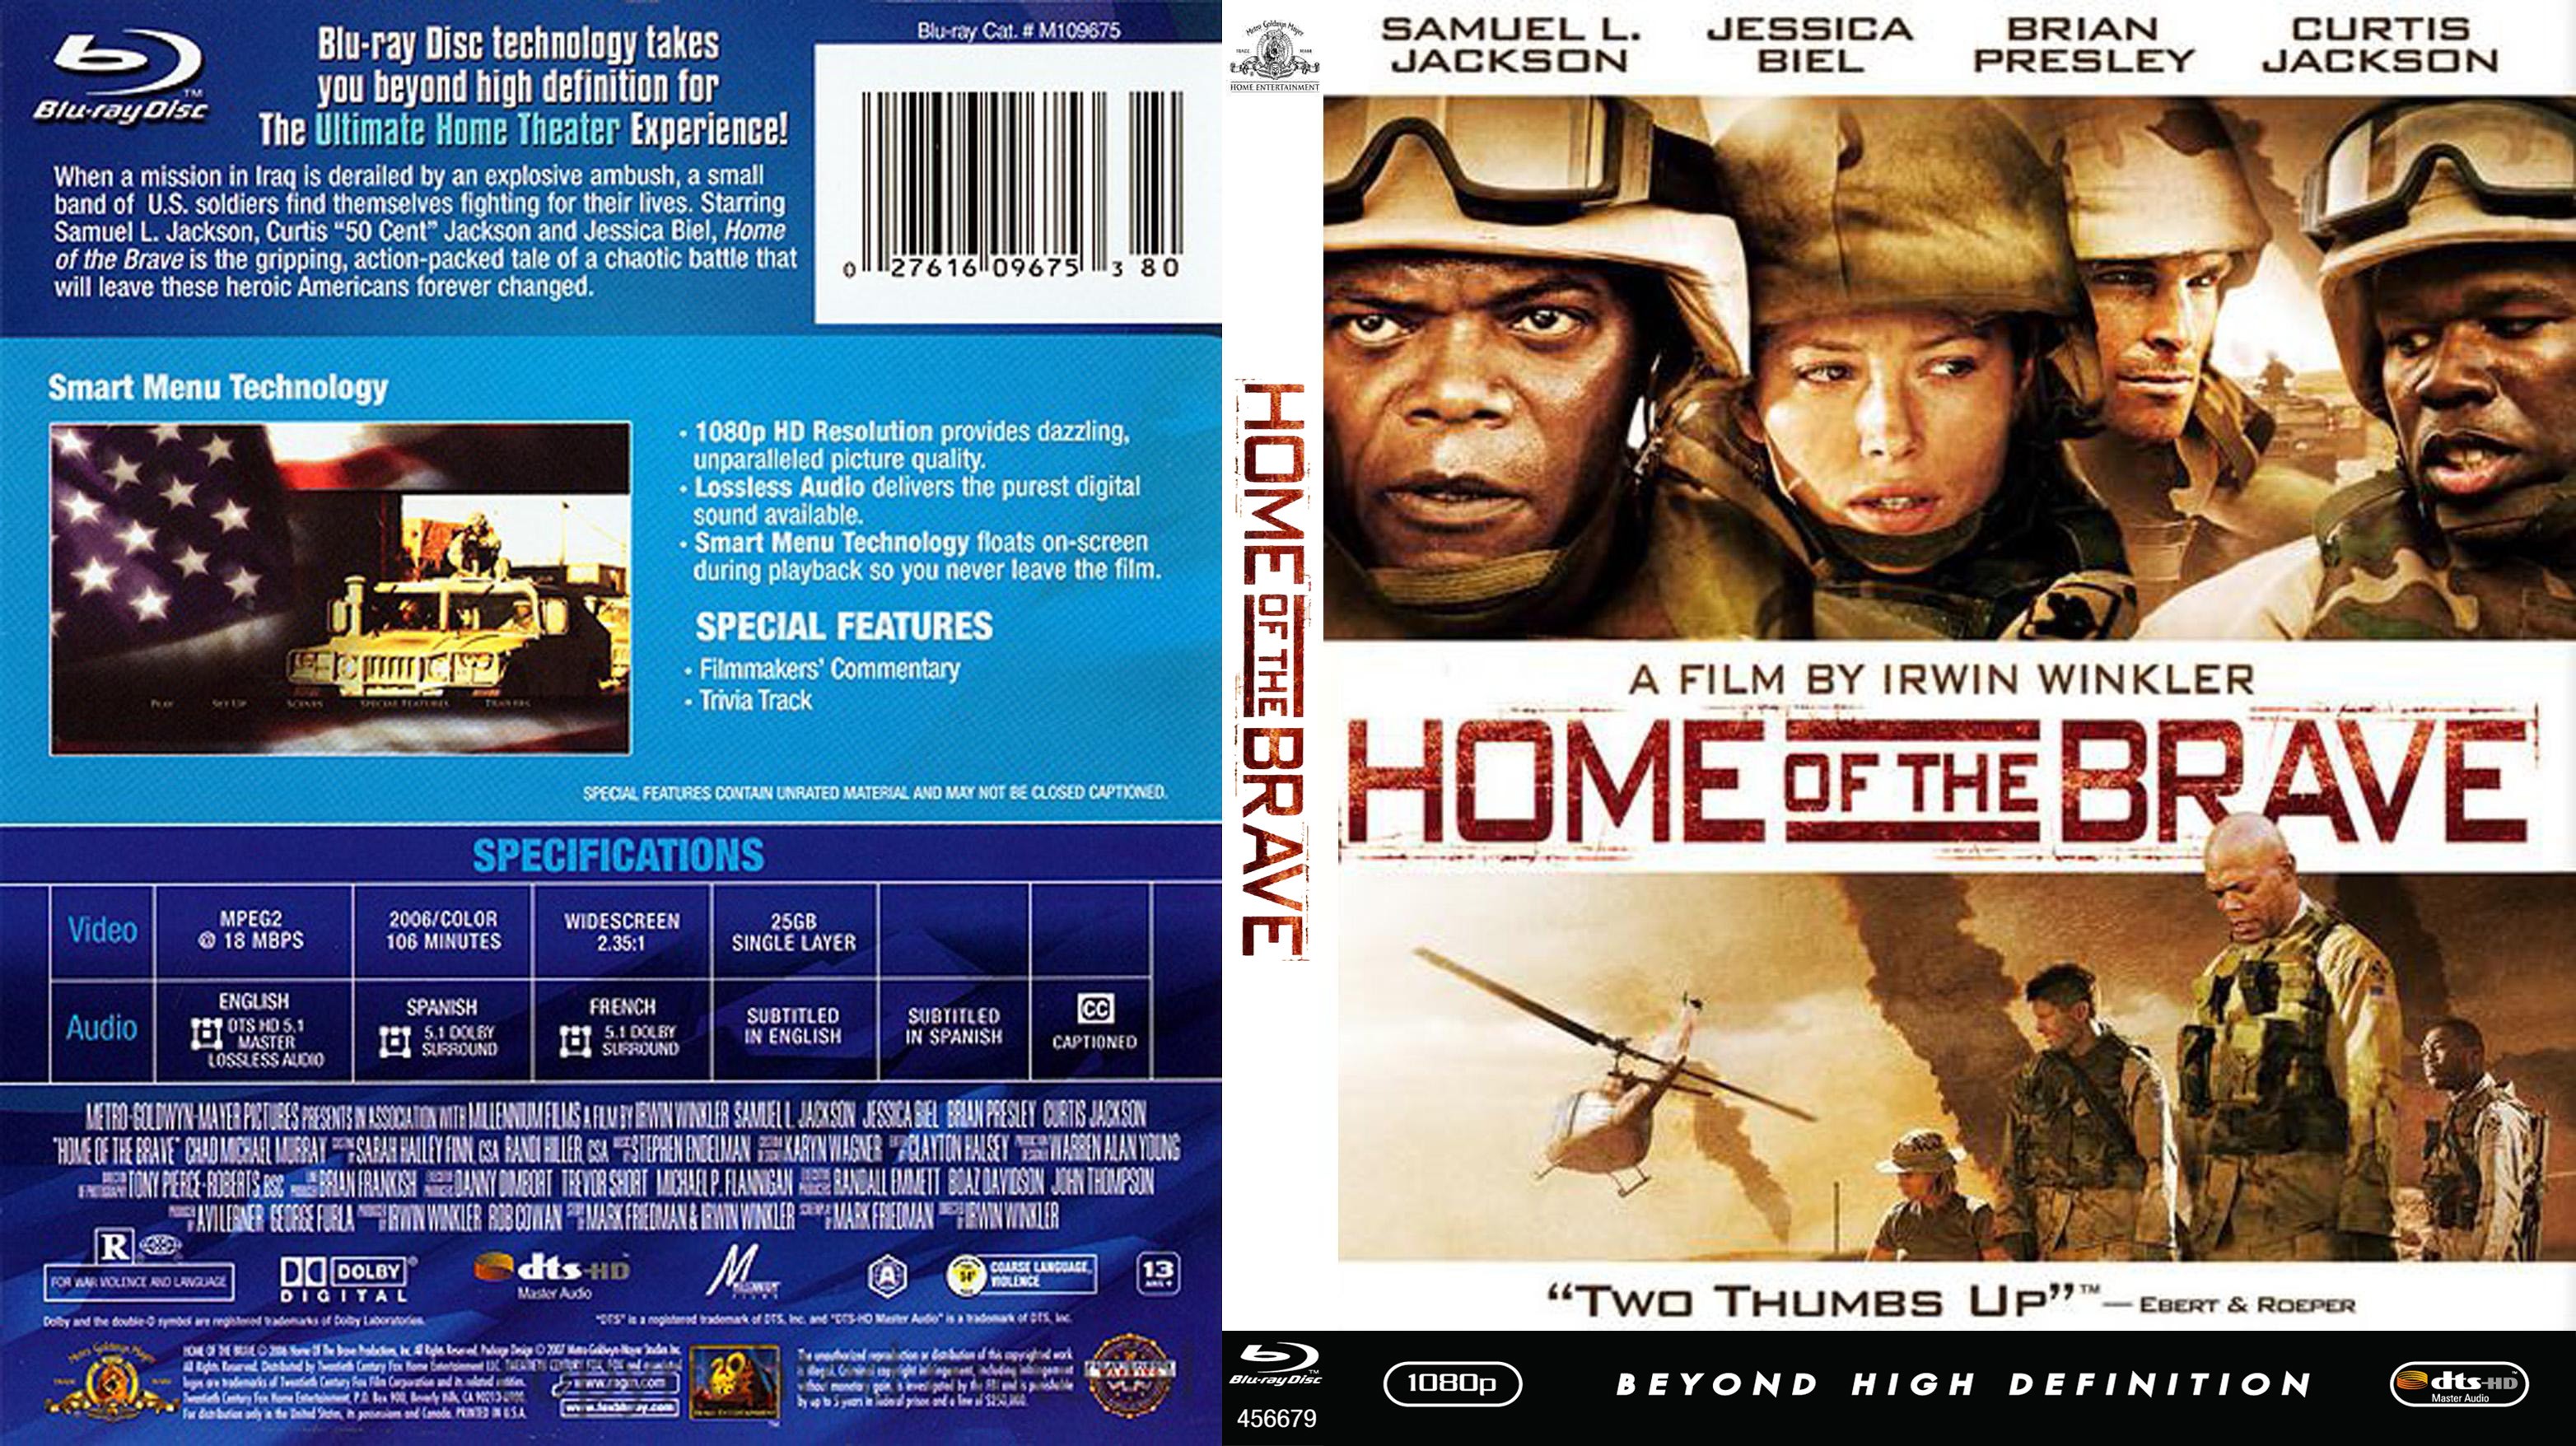 Jaquette DVD Home Of The Brave Zone 1 (BLU-RAY)